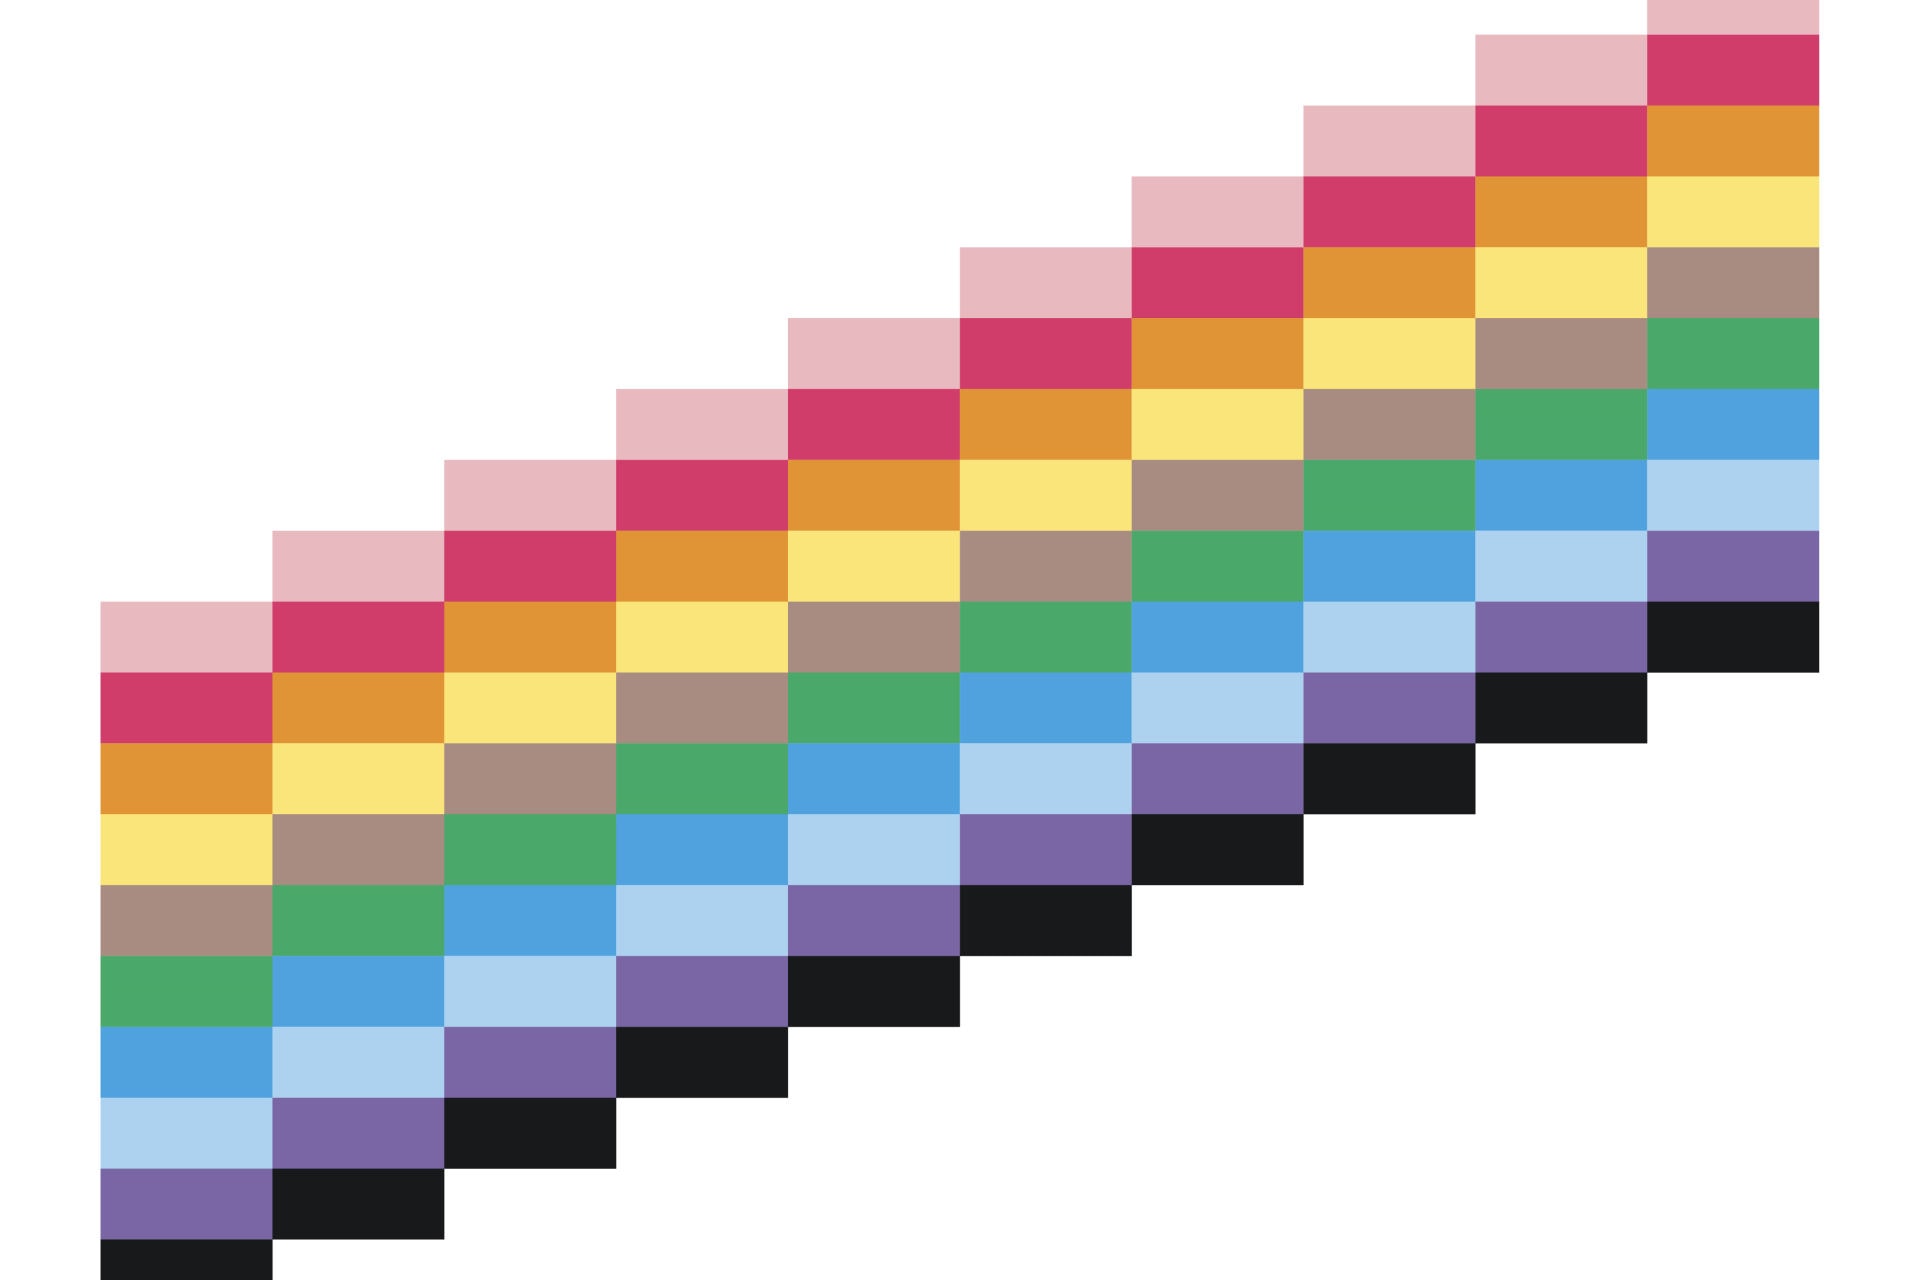 Trans & Gay Pride flags combined